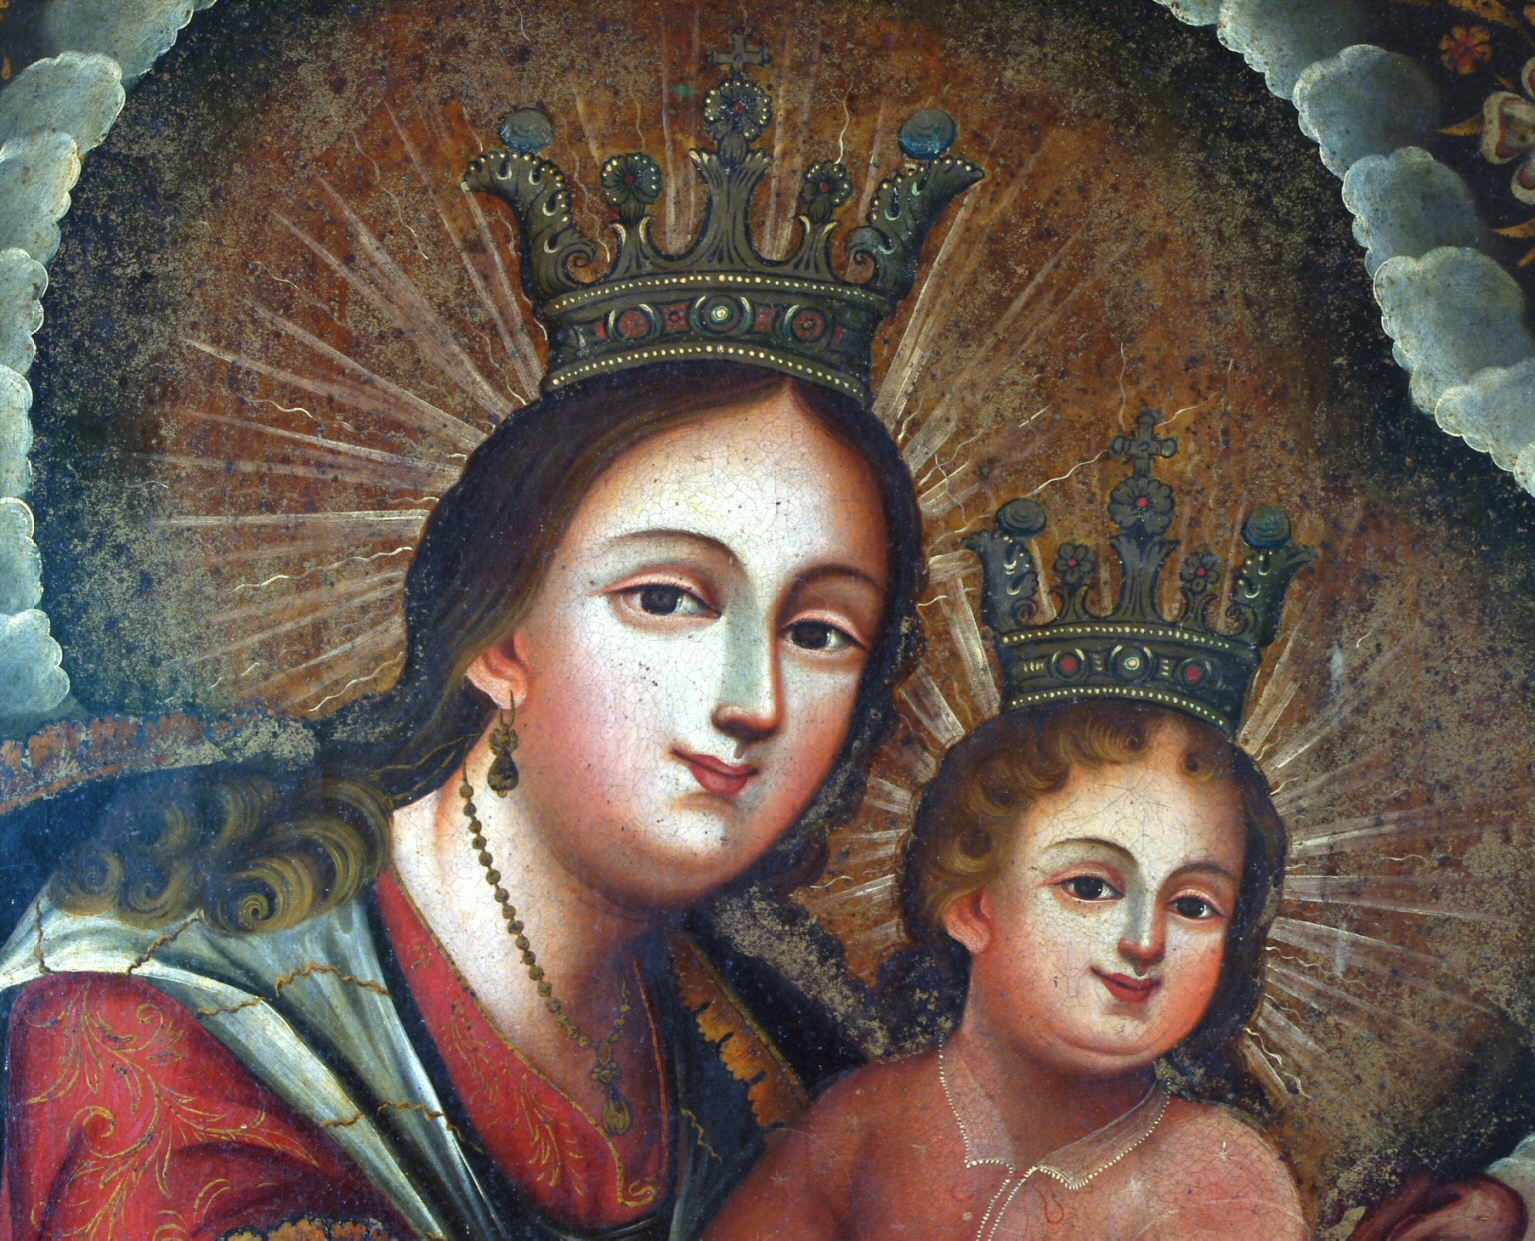 "Our Lady, Refuge of Sinners"